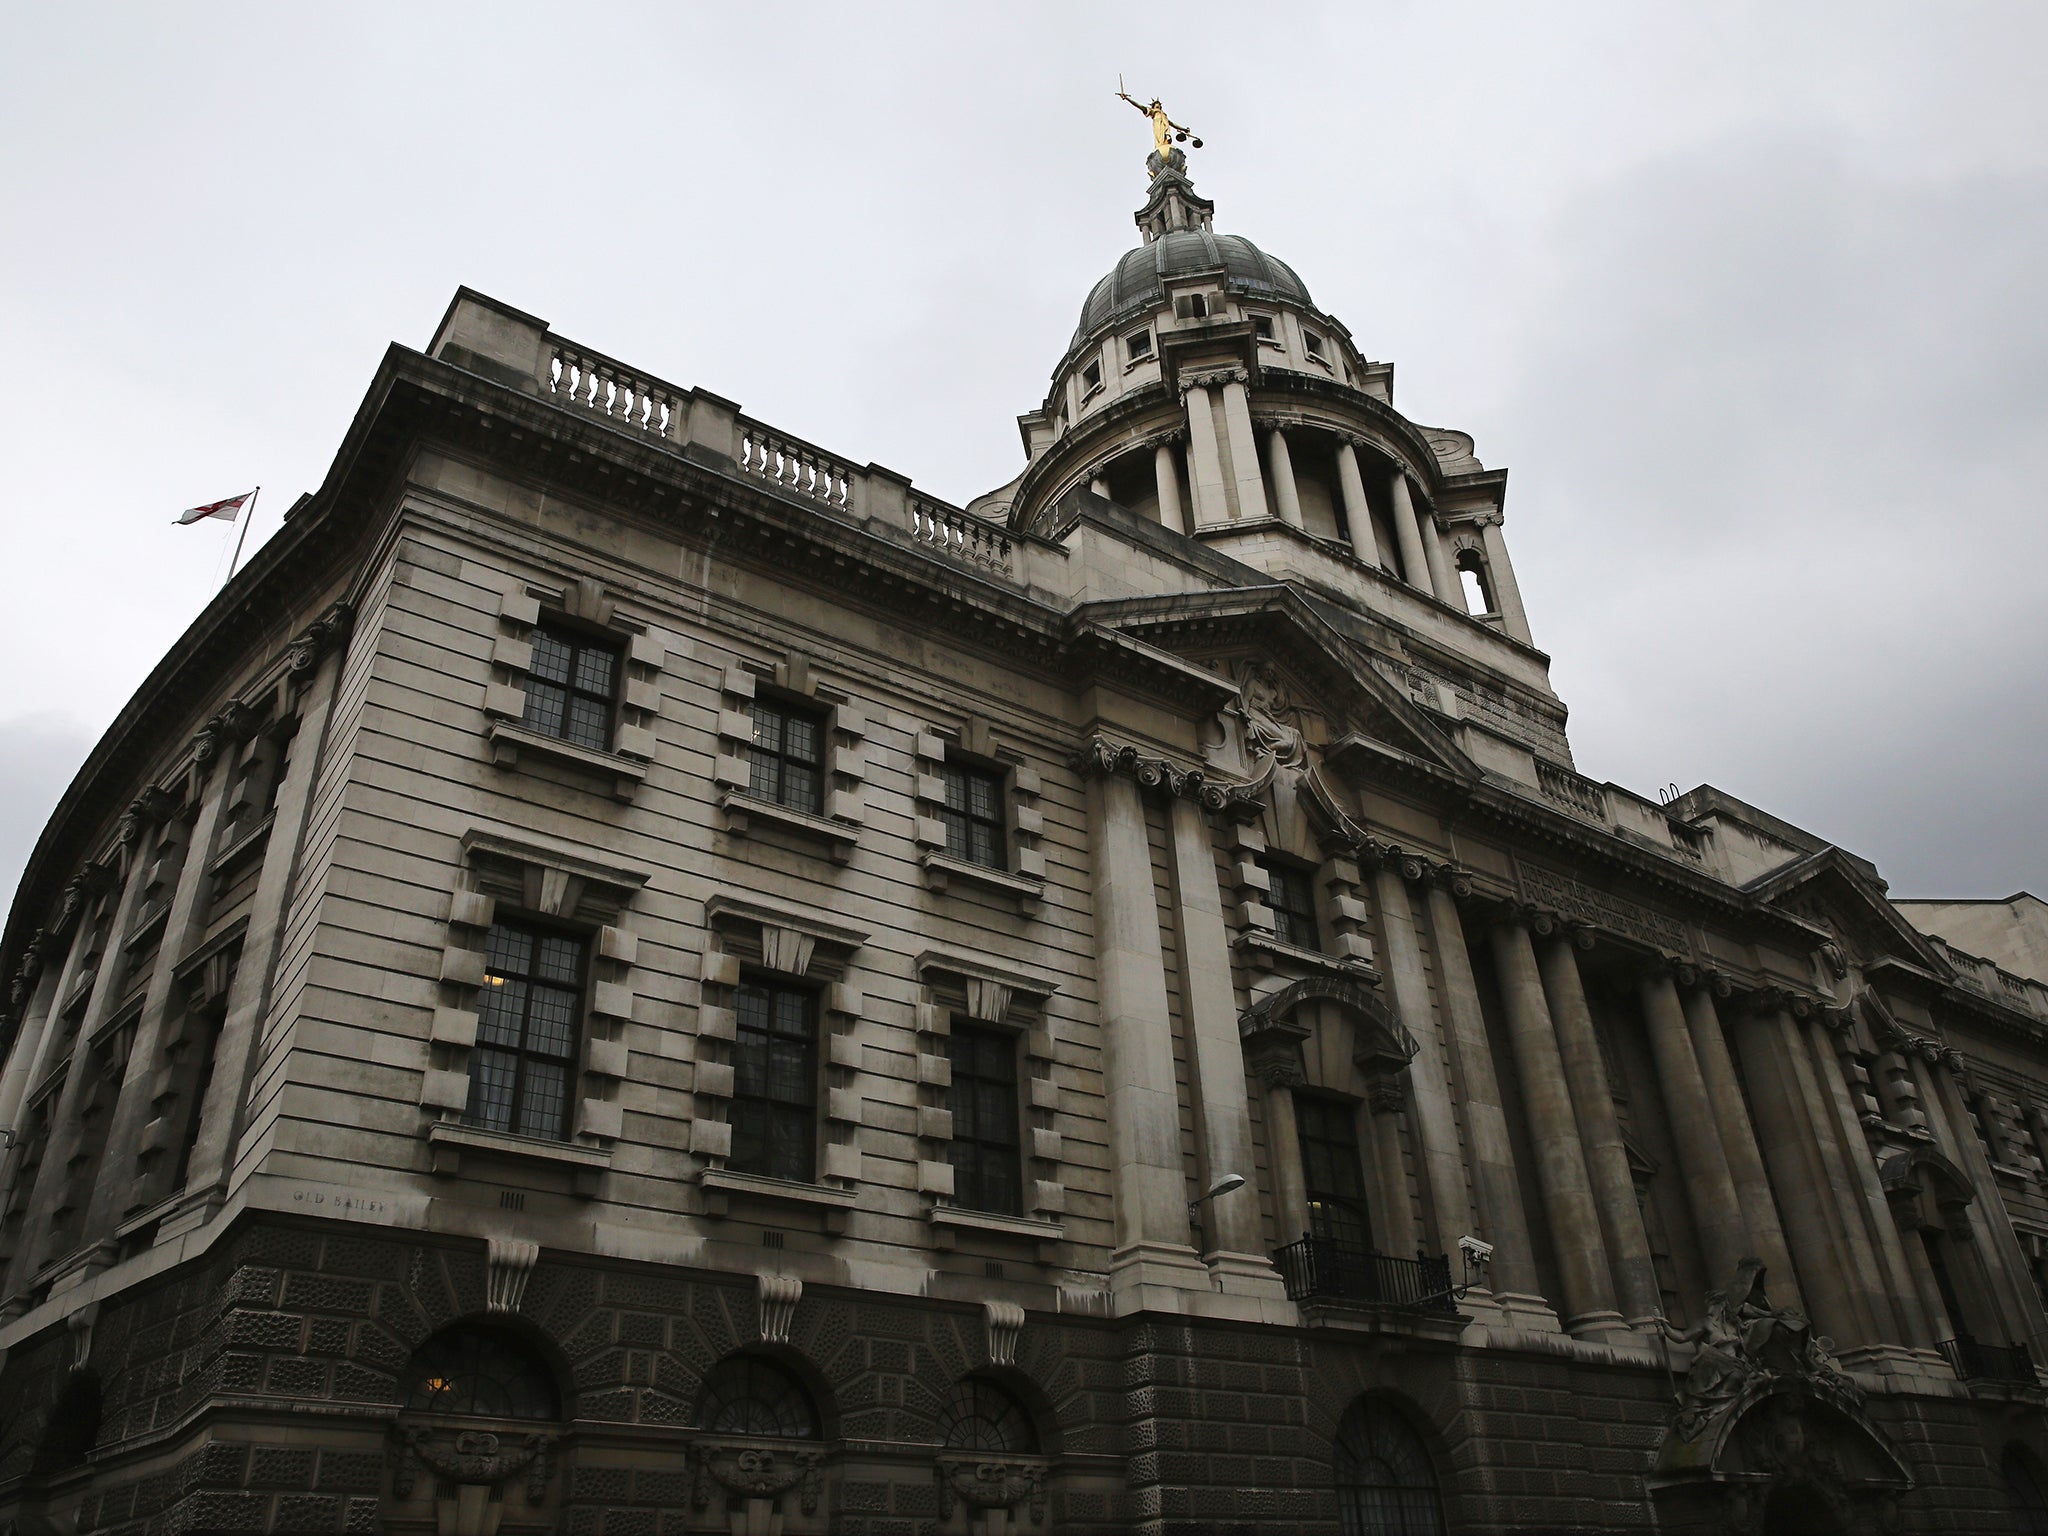 The Old Bailey heard the girl kept her pregnancy secret before giving birth unaided